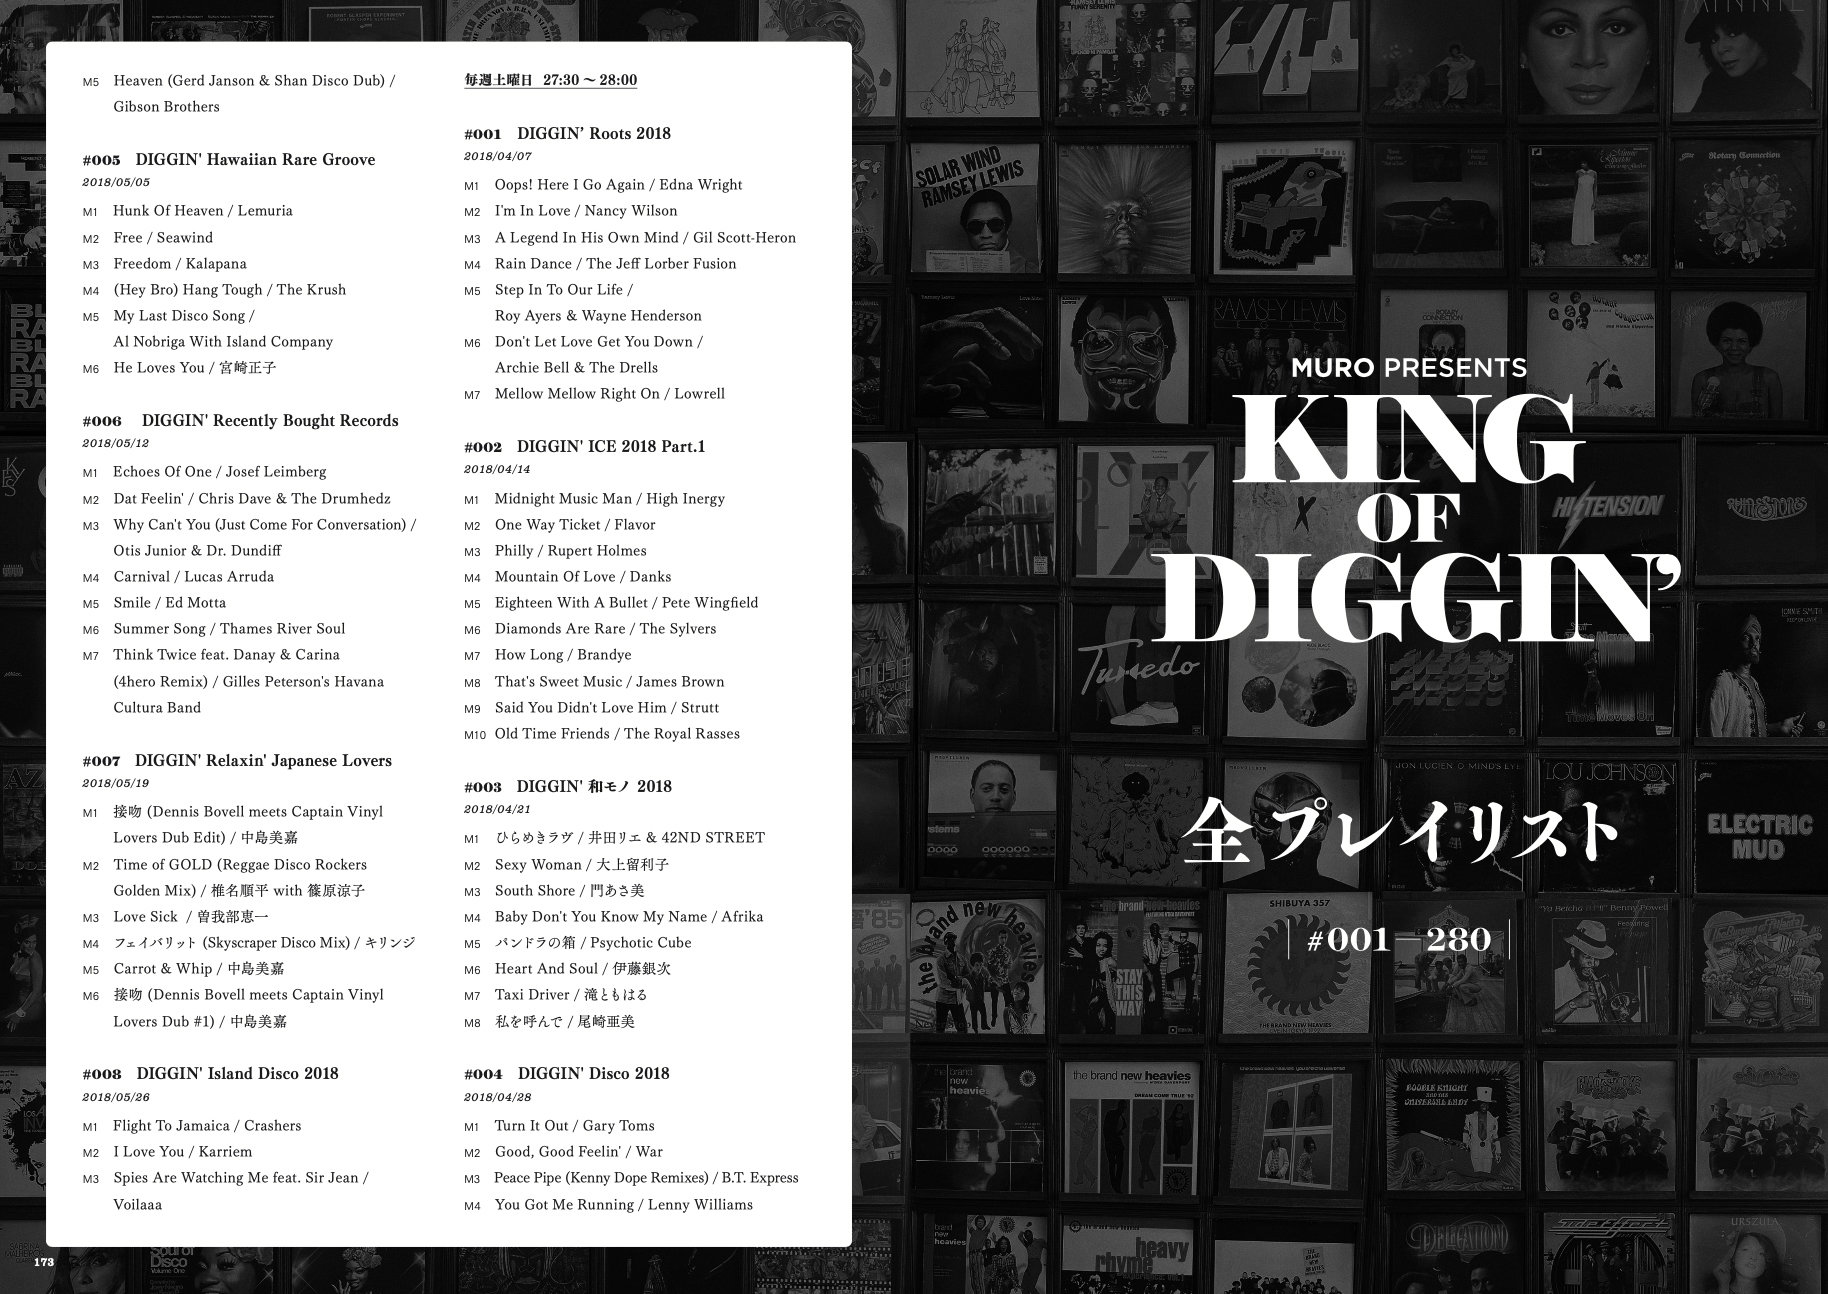 MURO PRESENTS KING OF DIGGIN' OFFICIAL BOOK|商品一覧|リットー 